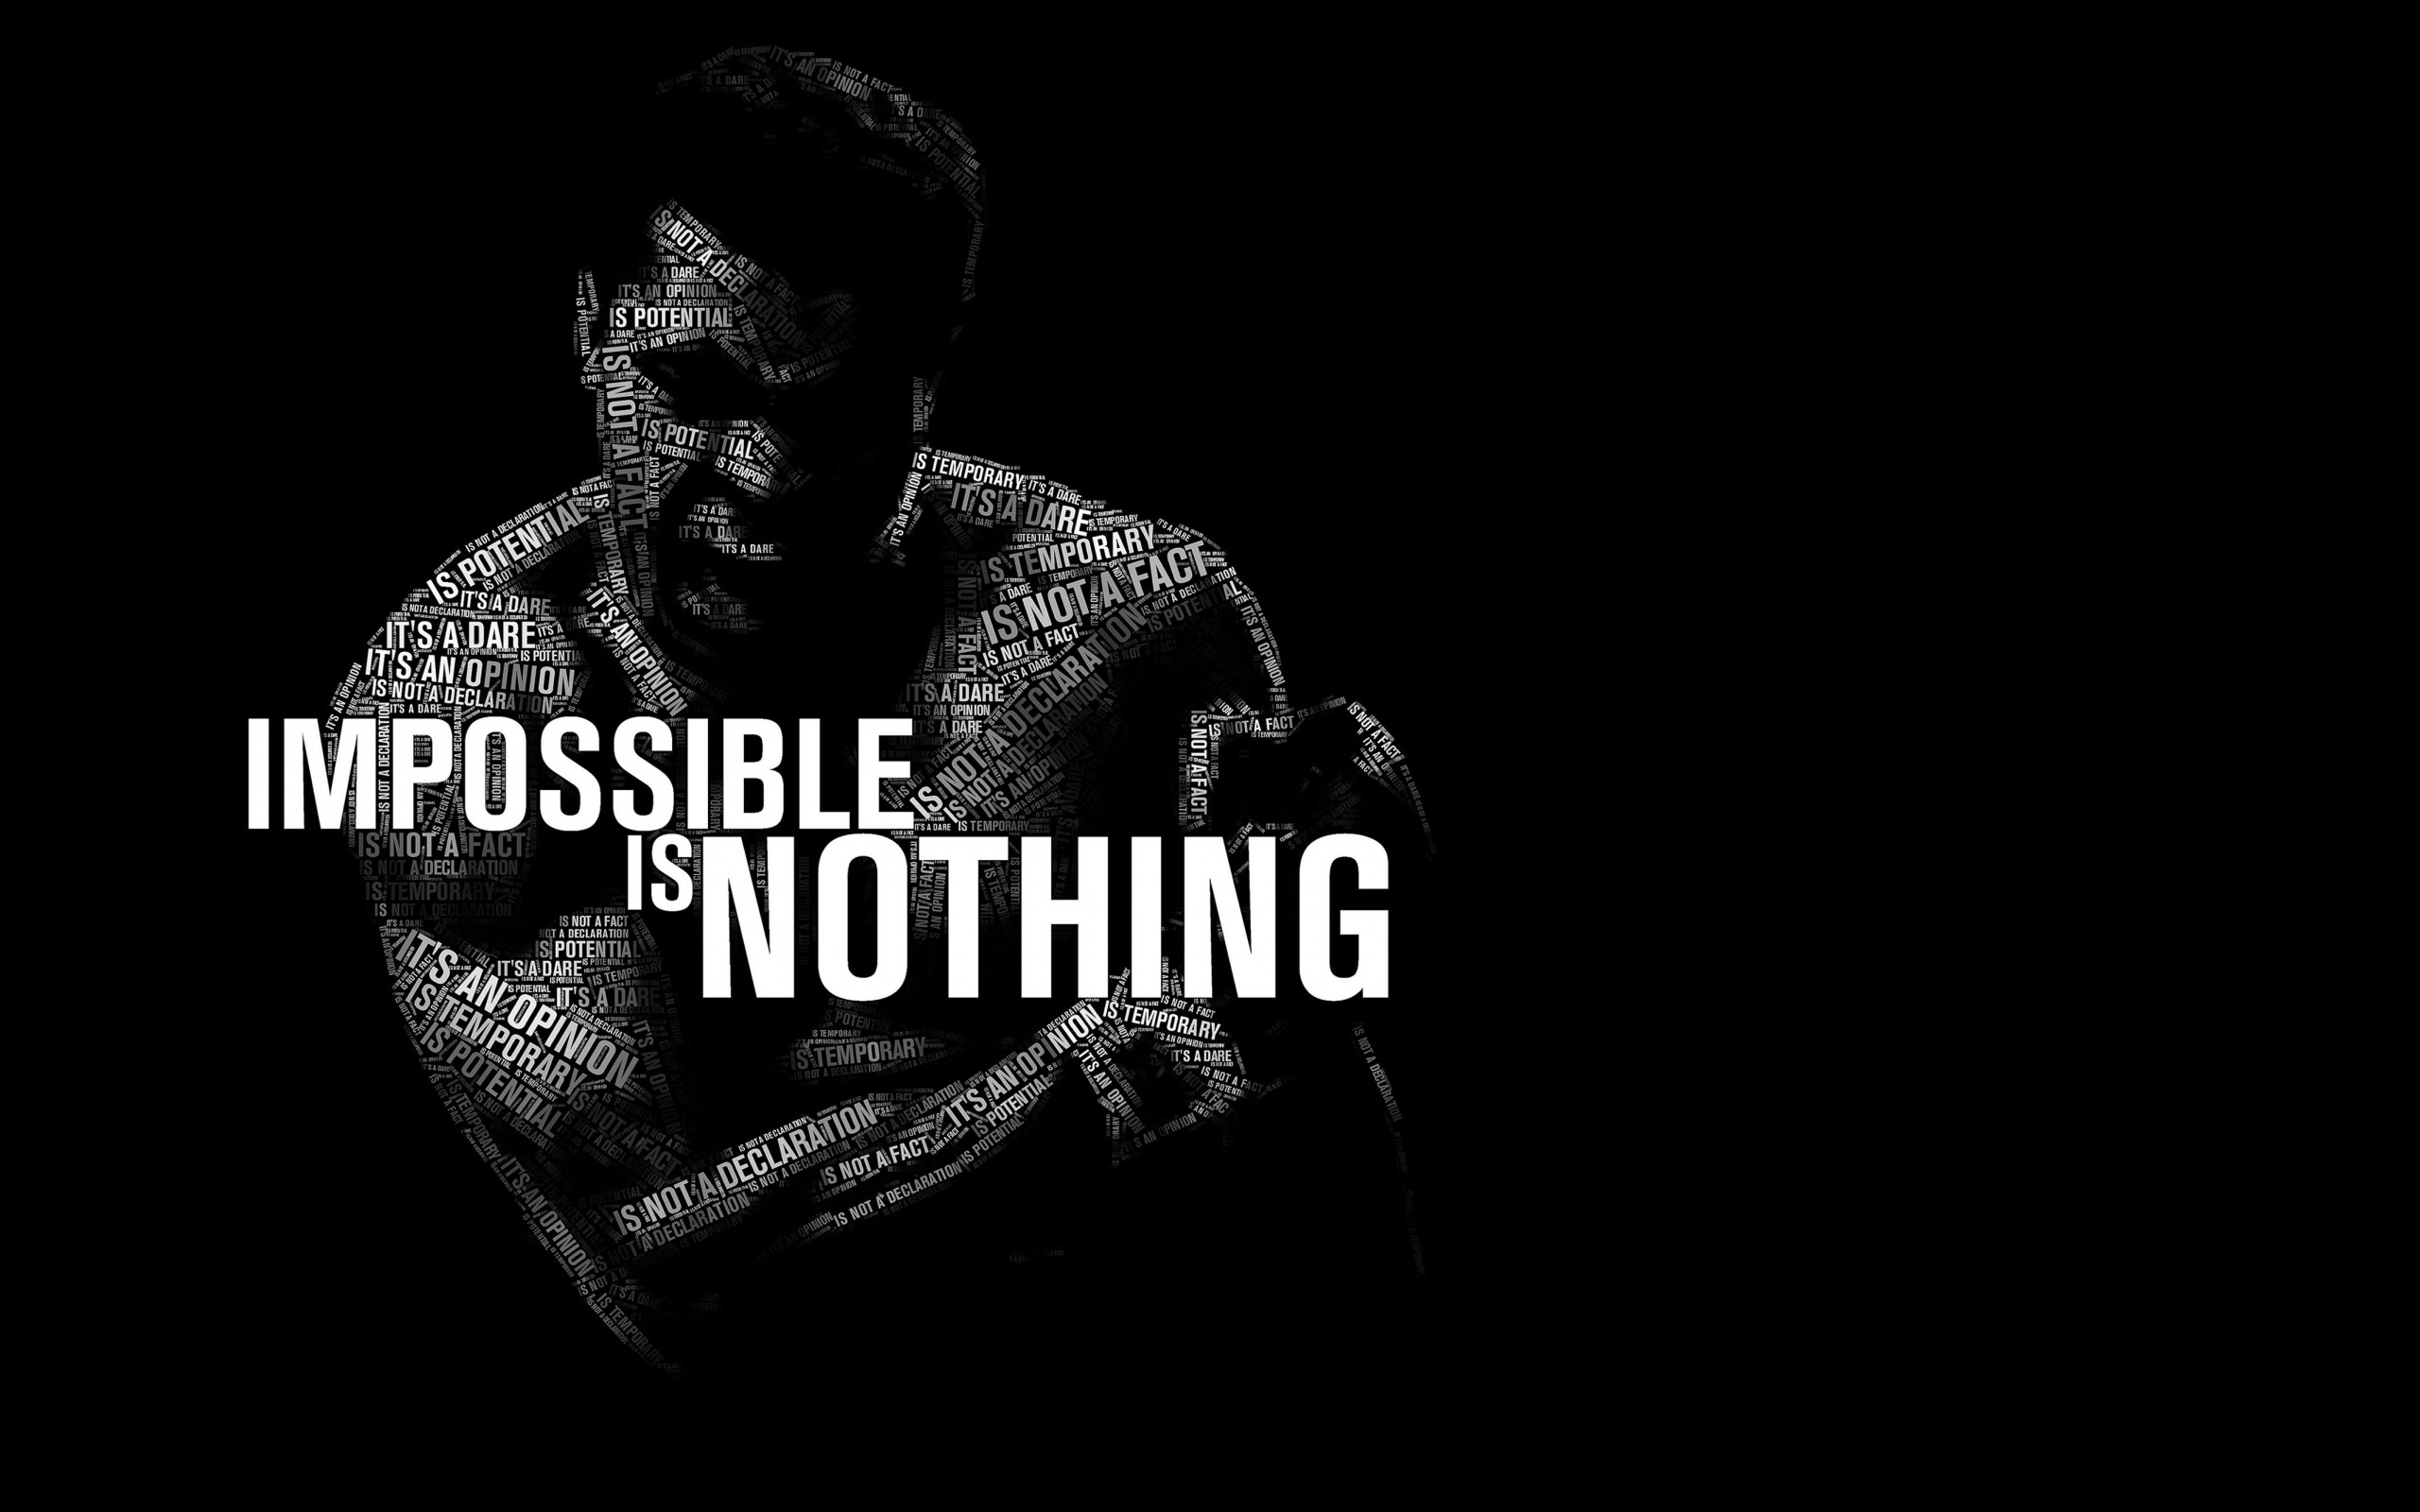 Impossible Is Nothing - Muhammad Ali Wallpaper for Desktop 2560x1600